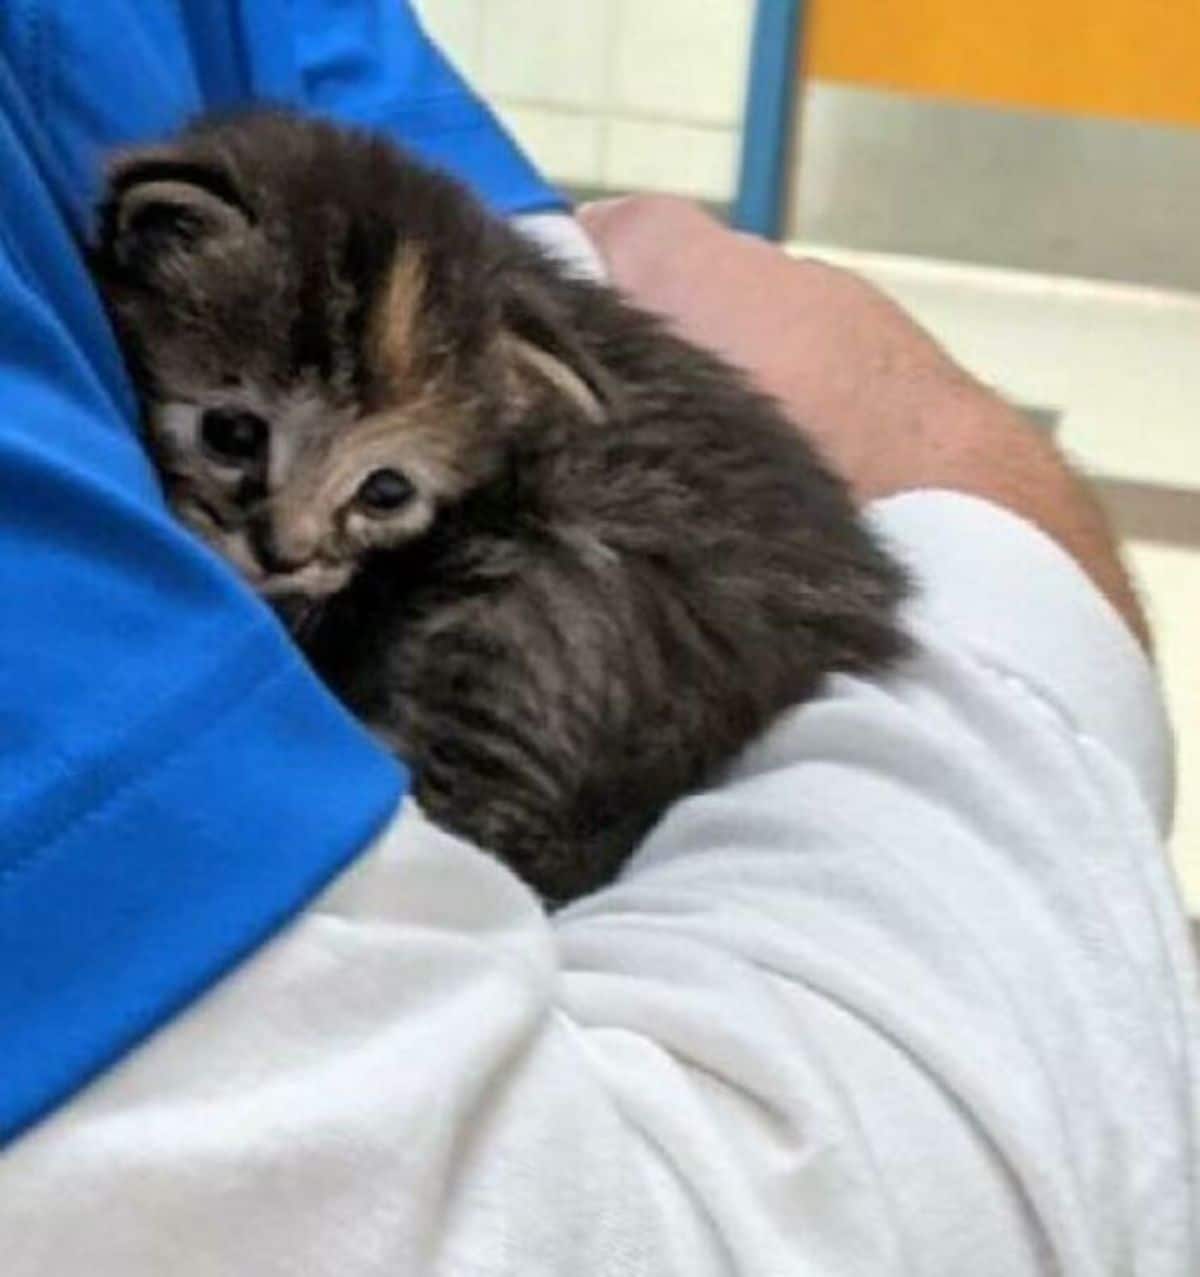 black tabby kitten getting hugged by someone wearing blue and grey